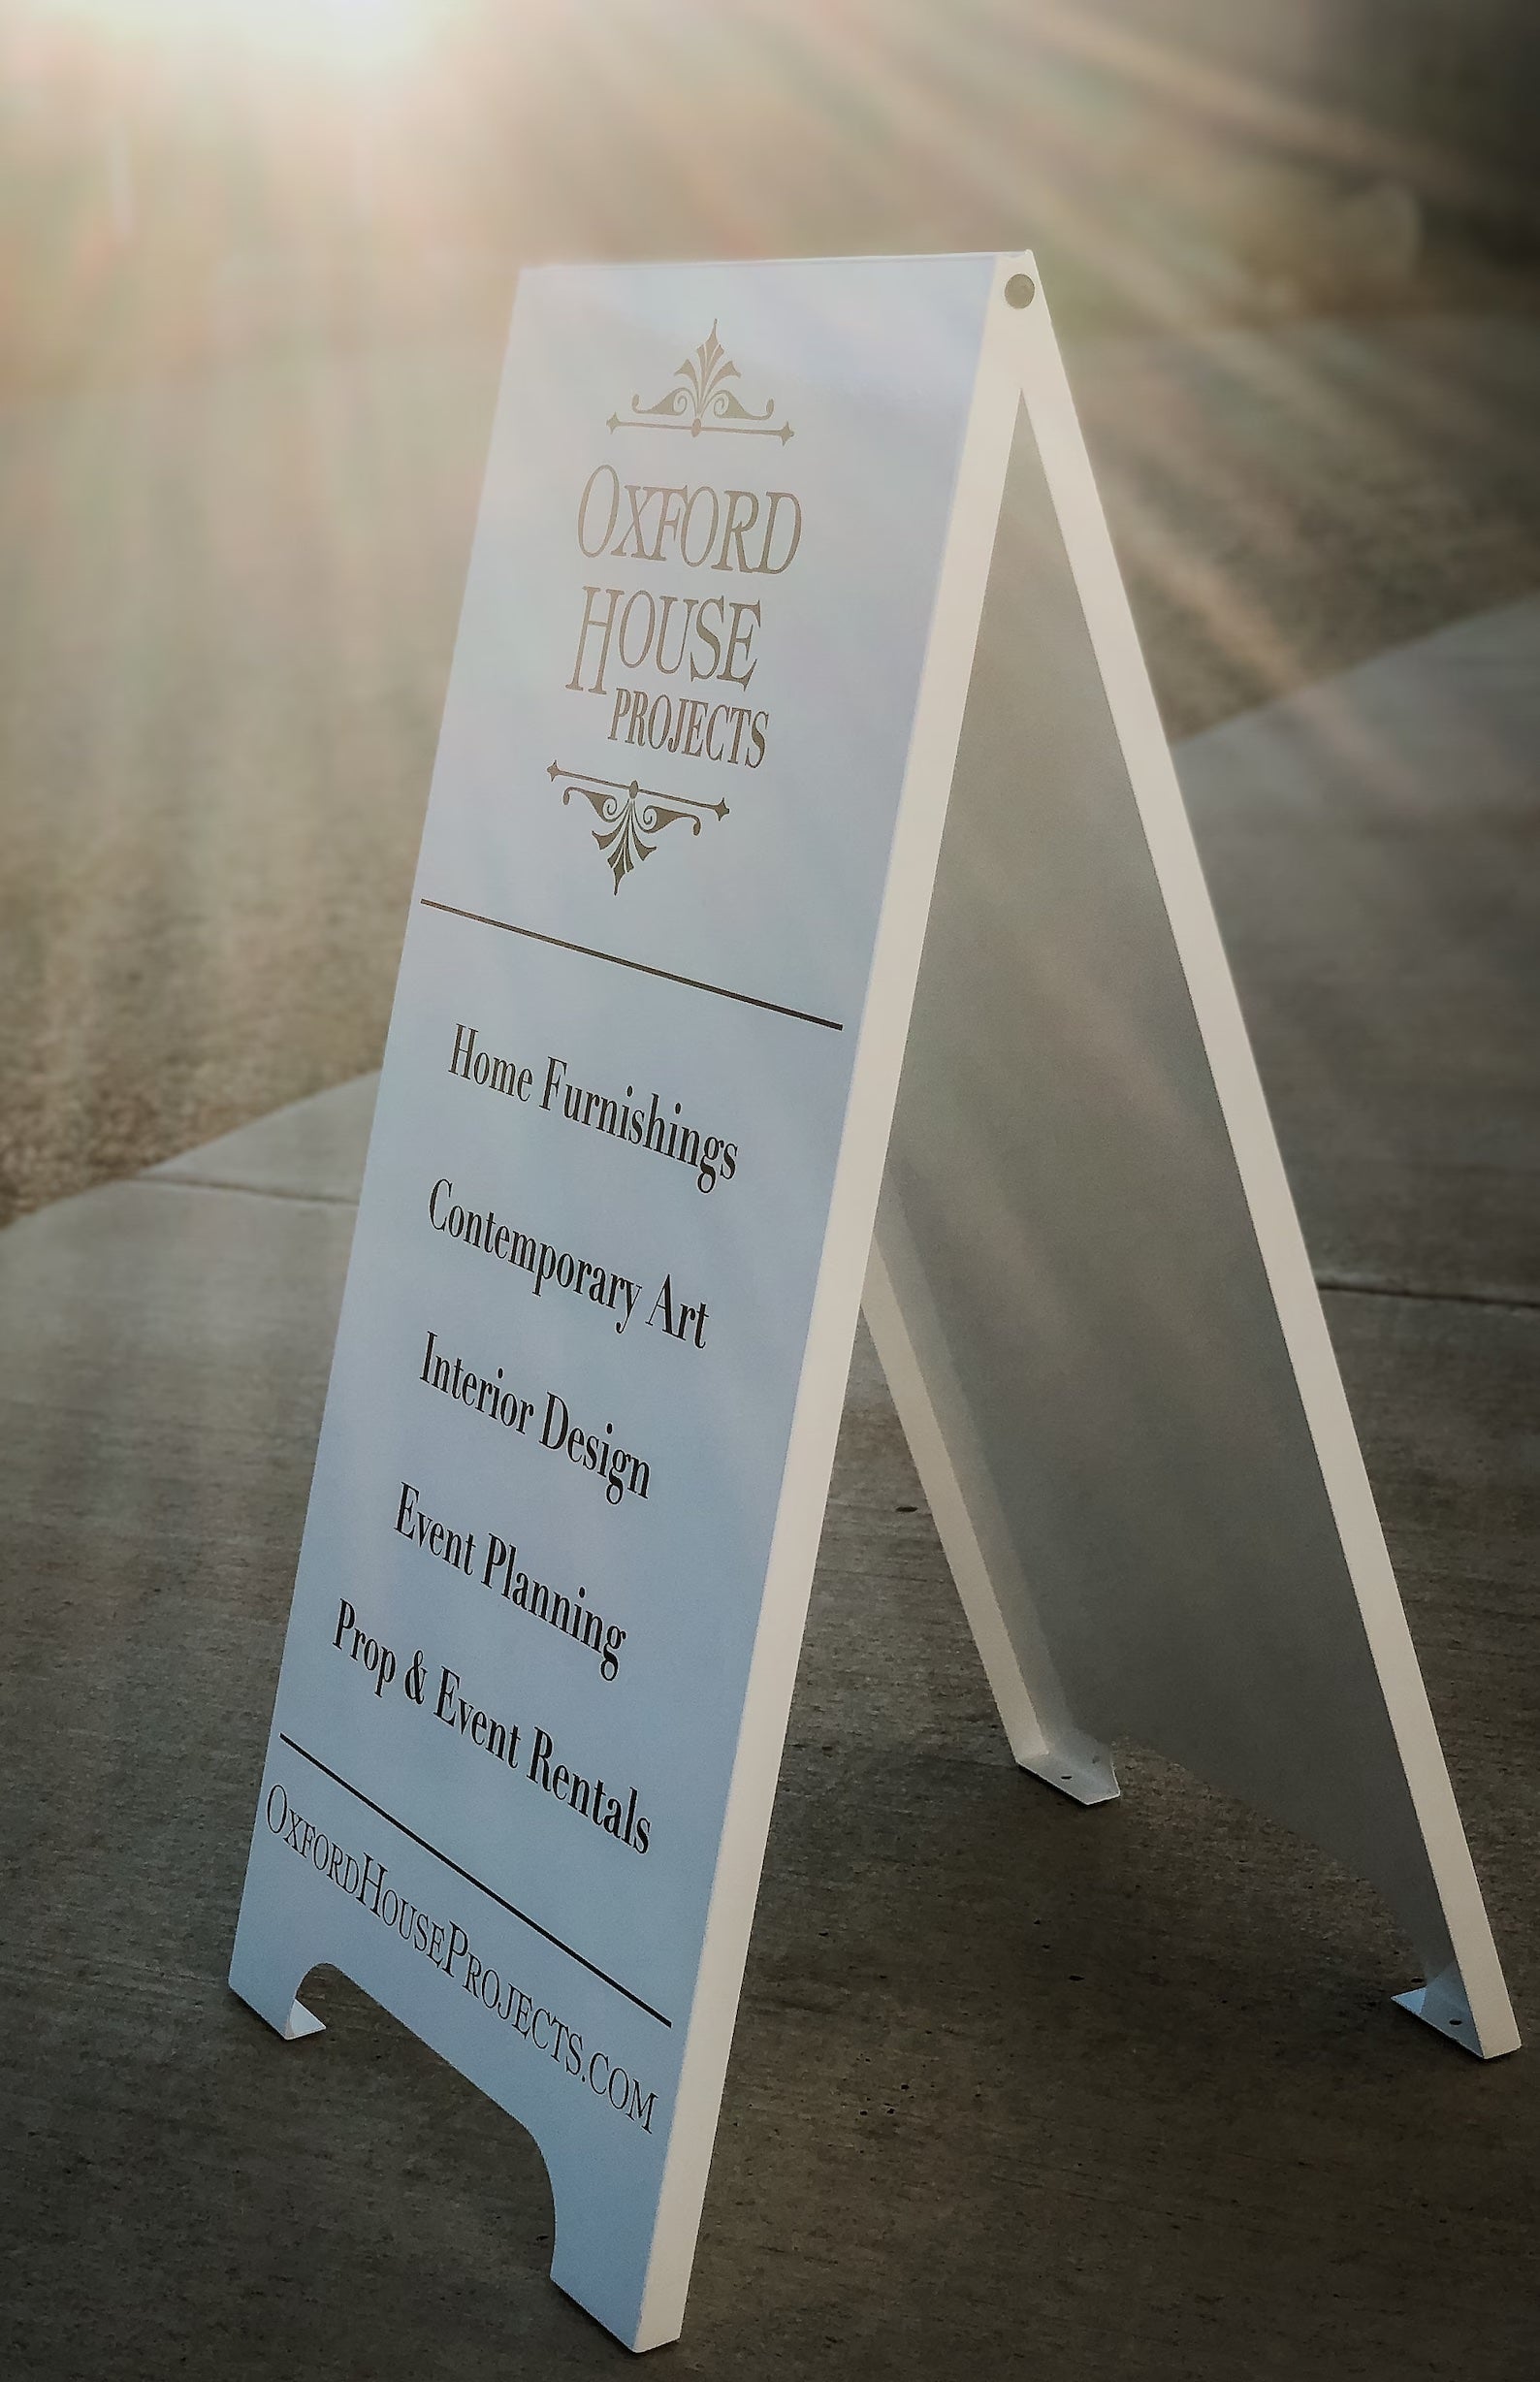 Custom sandwhich board sidewalk sign made of white metal and black text